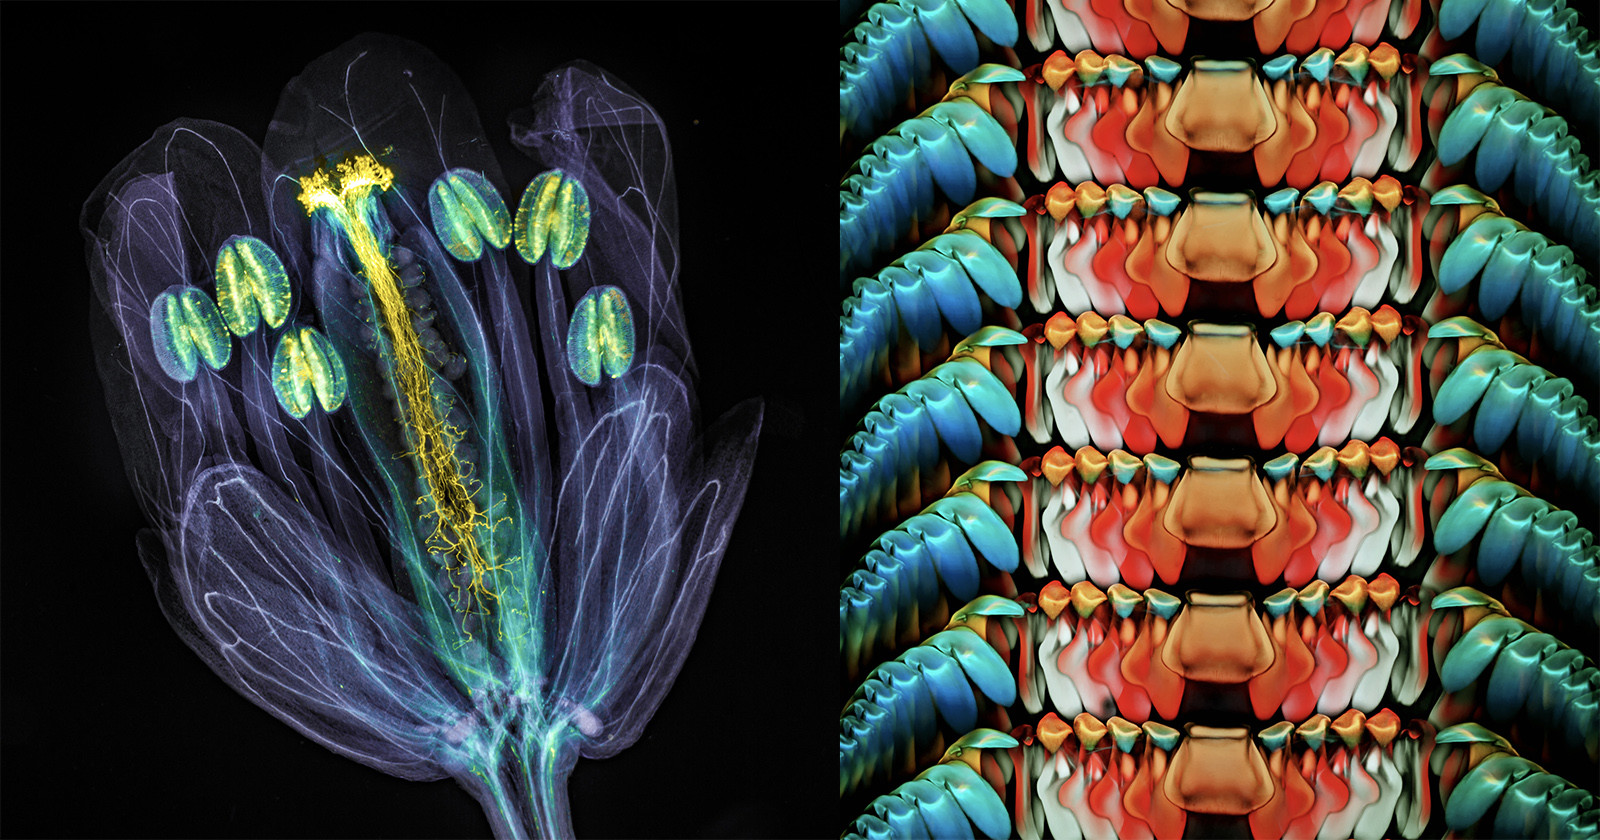 The Best Microscopic Life Science Photos of 2021